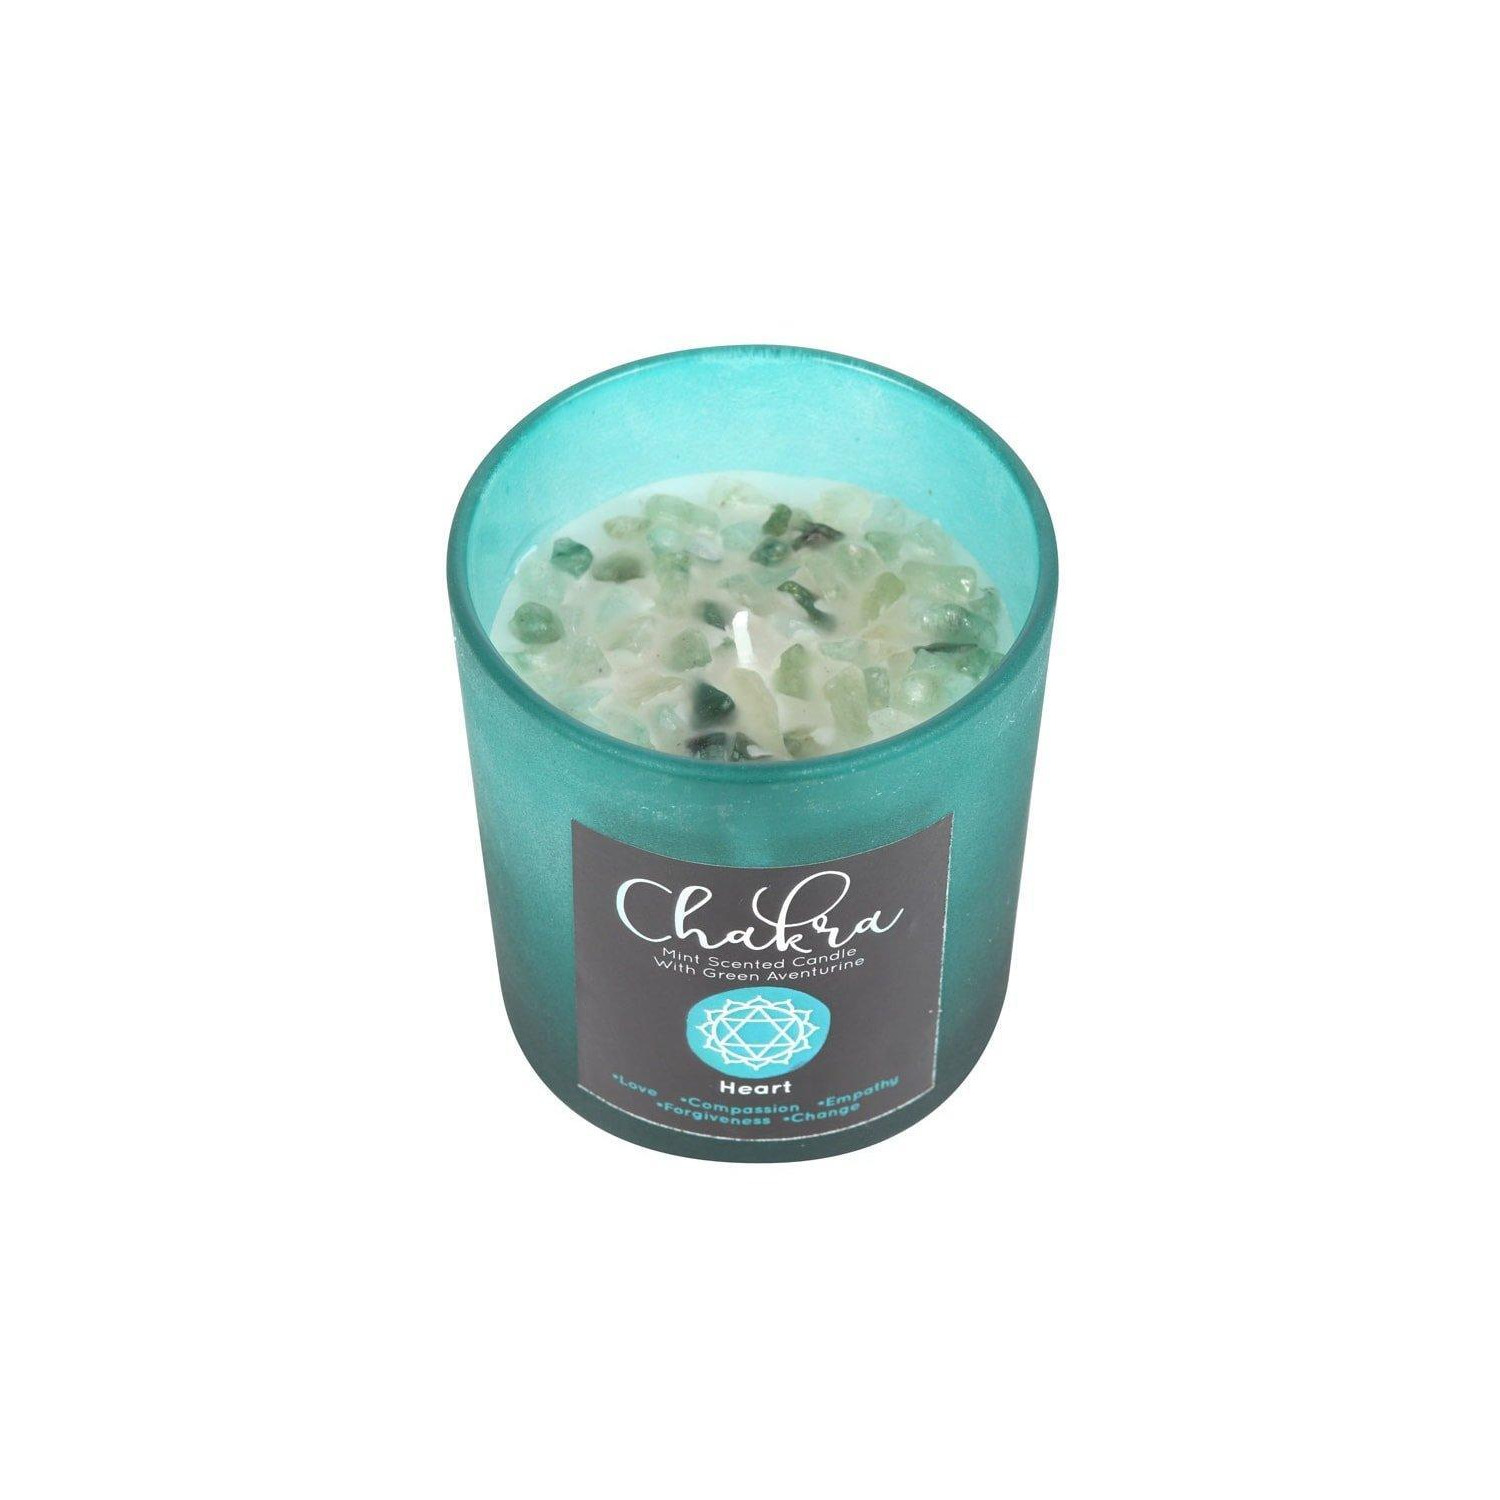 Mint Heart Chakra Scented Candle - image 1